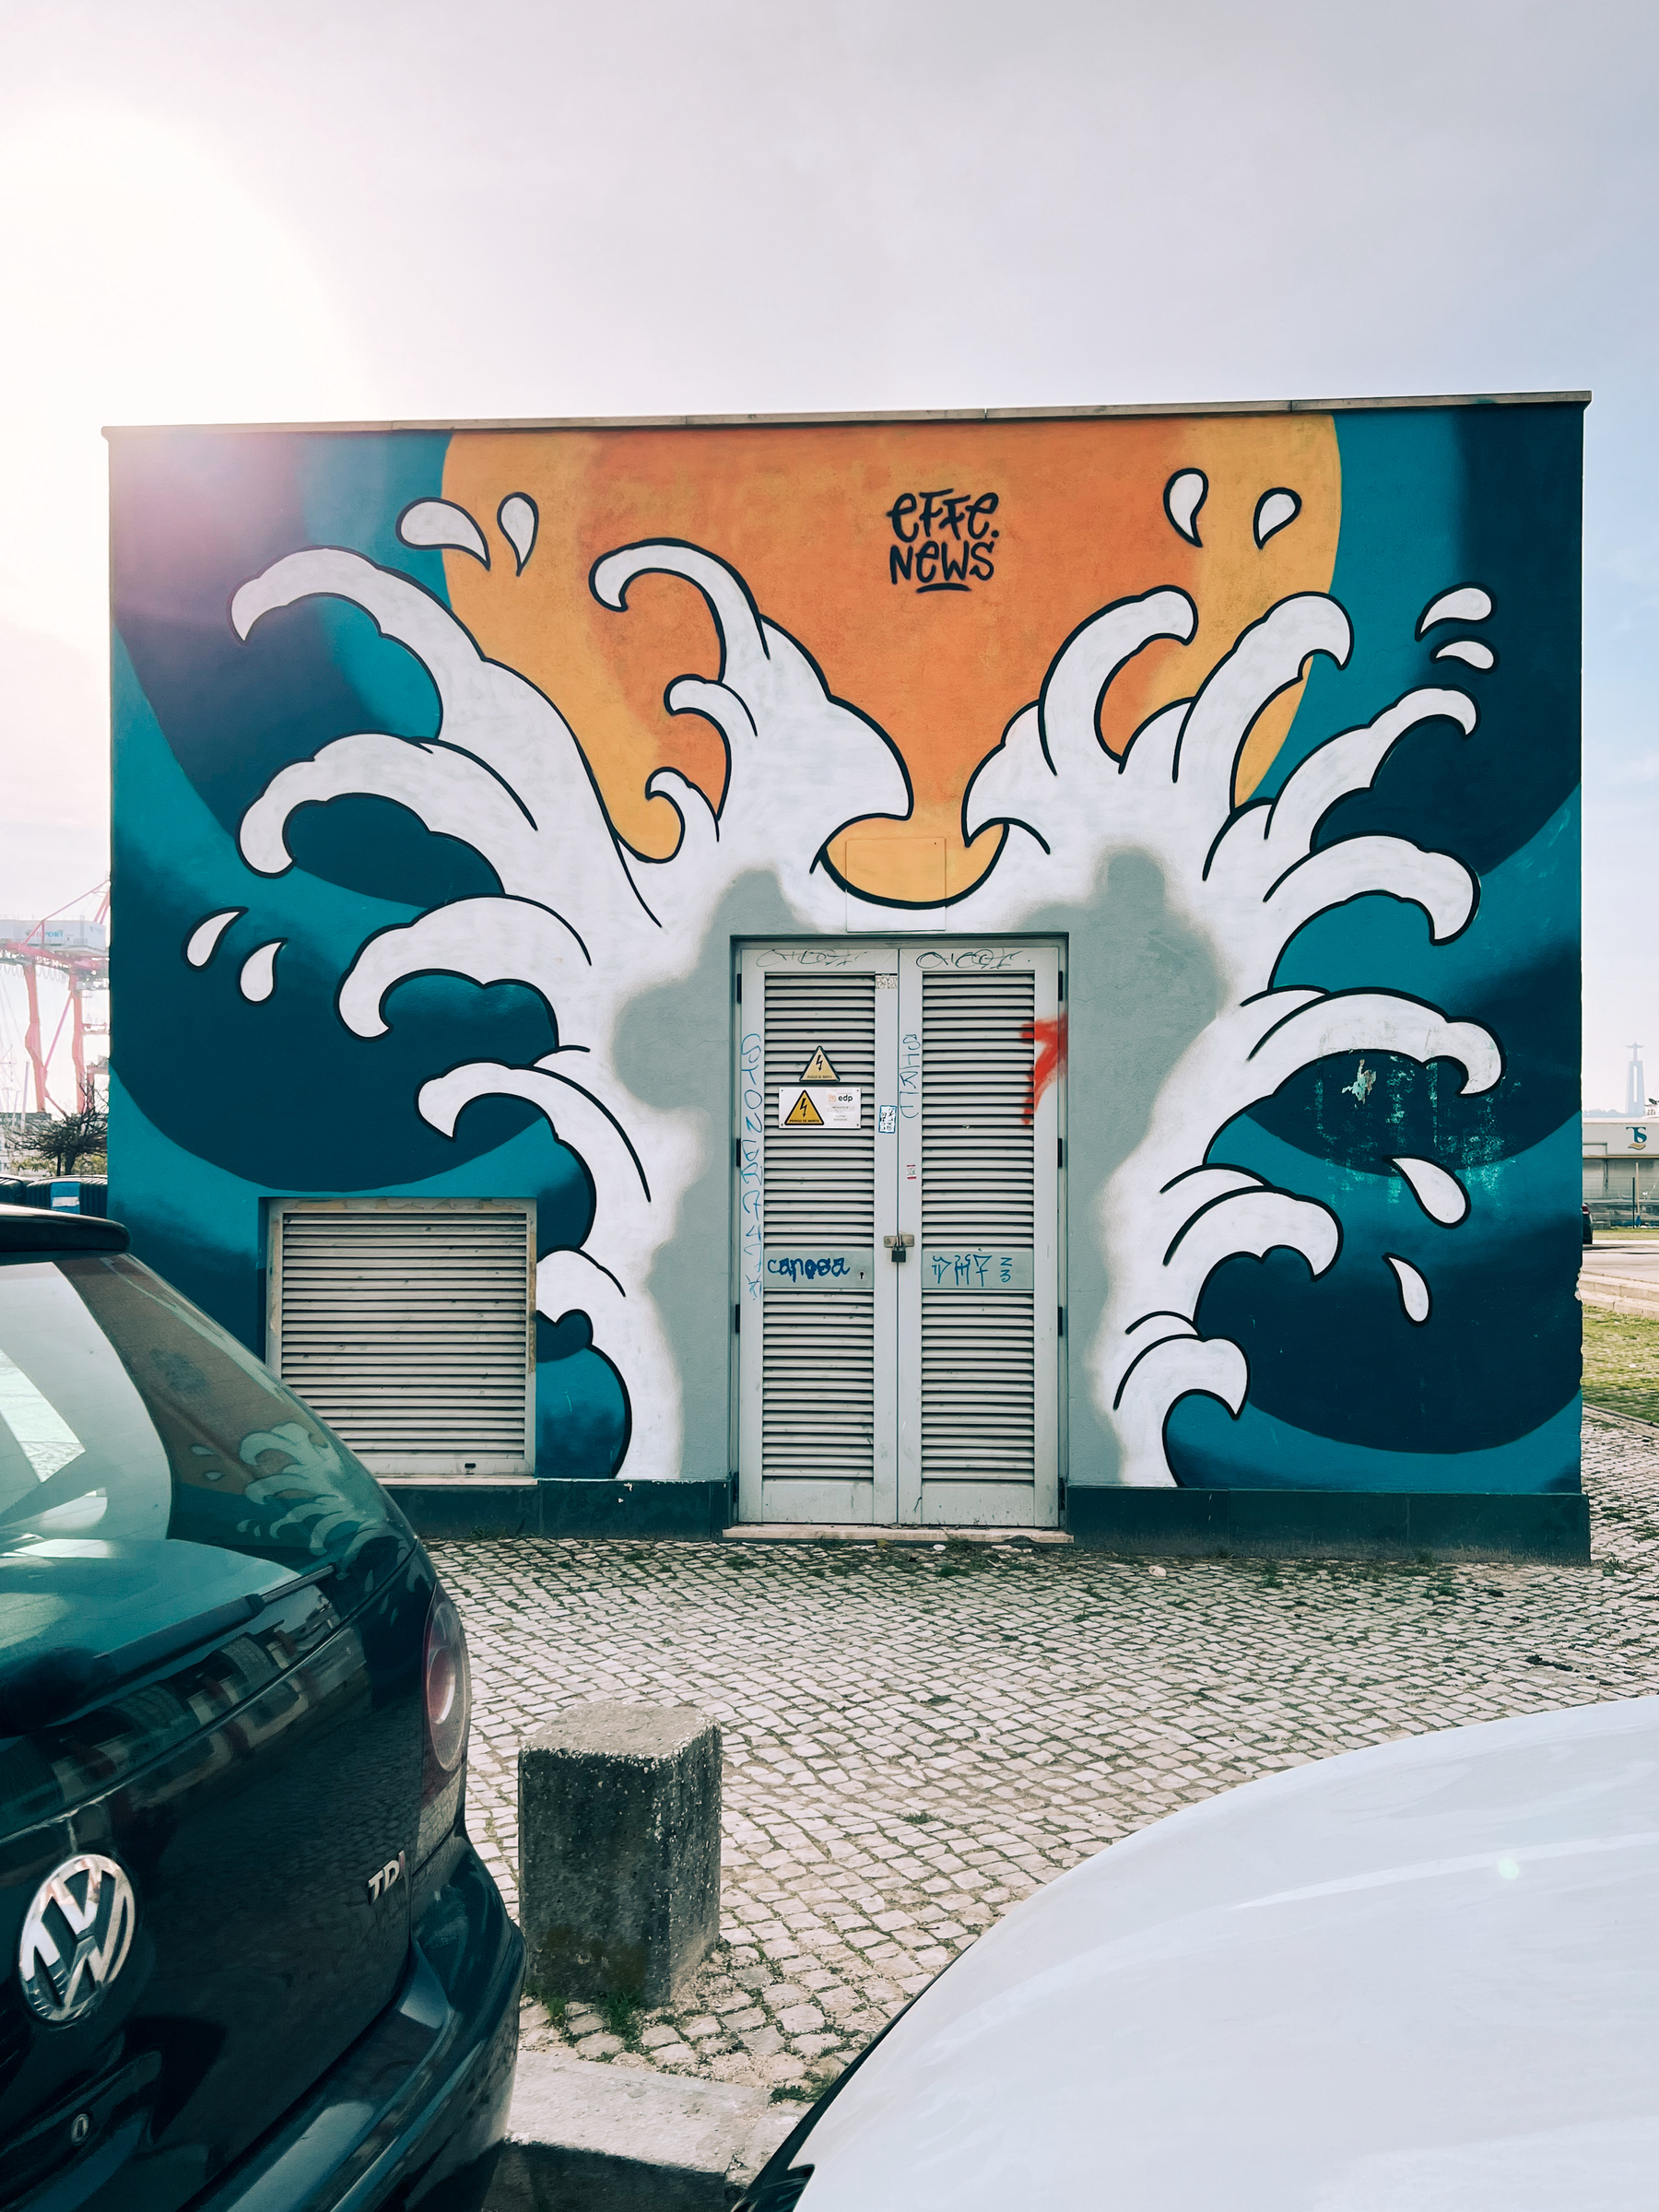 A colorful mural with wave designs on a building wall, featuring a blue and white color scheme with orange accents. The wall has two metal doors with graffiti tags, and two cars are partially visible in the foreground.